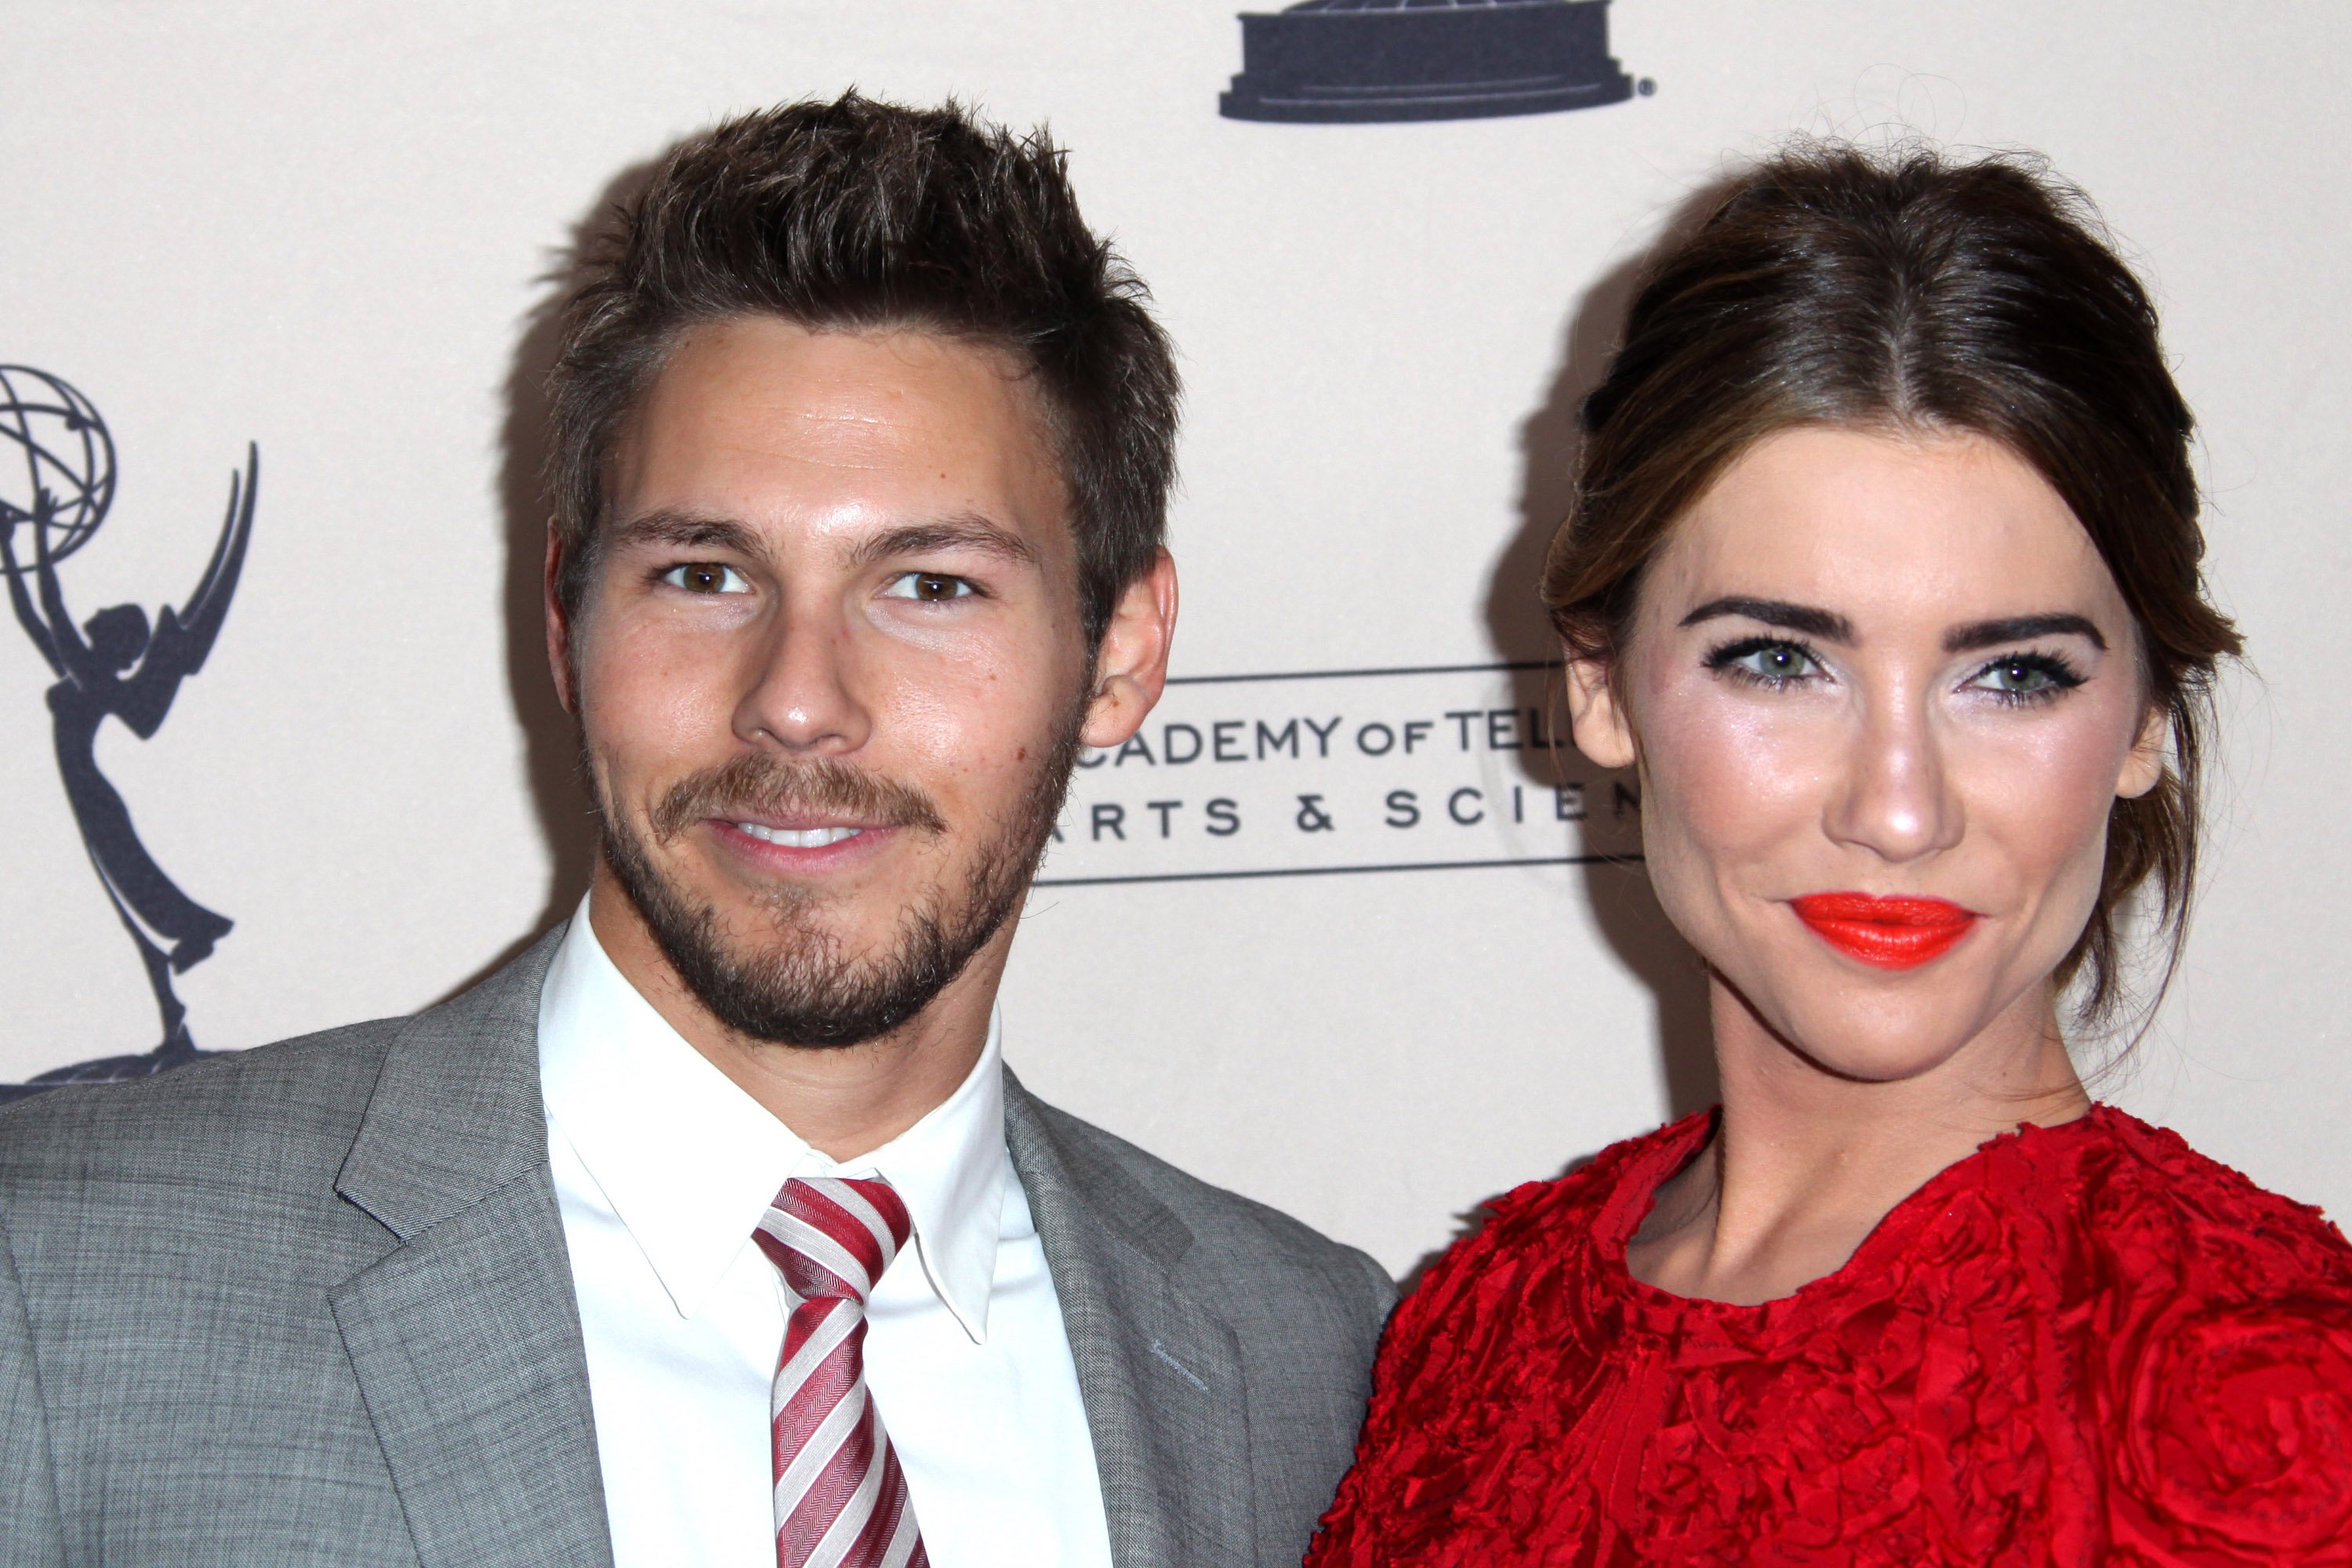 'The Bold and the Beautiful' actor Scott Clifton in a grey suit and Jacqueline MacInnes Wood in a red dress.